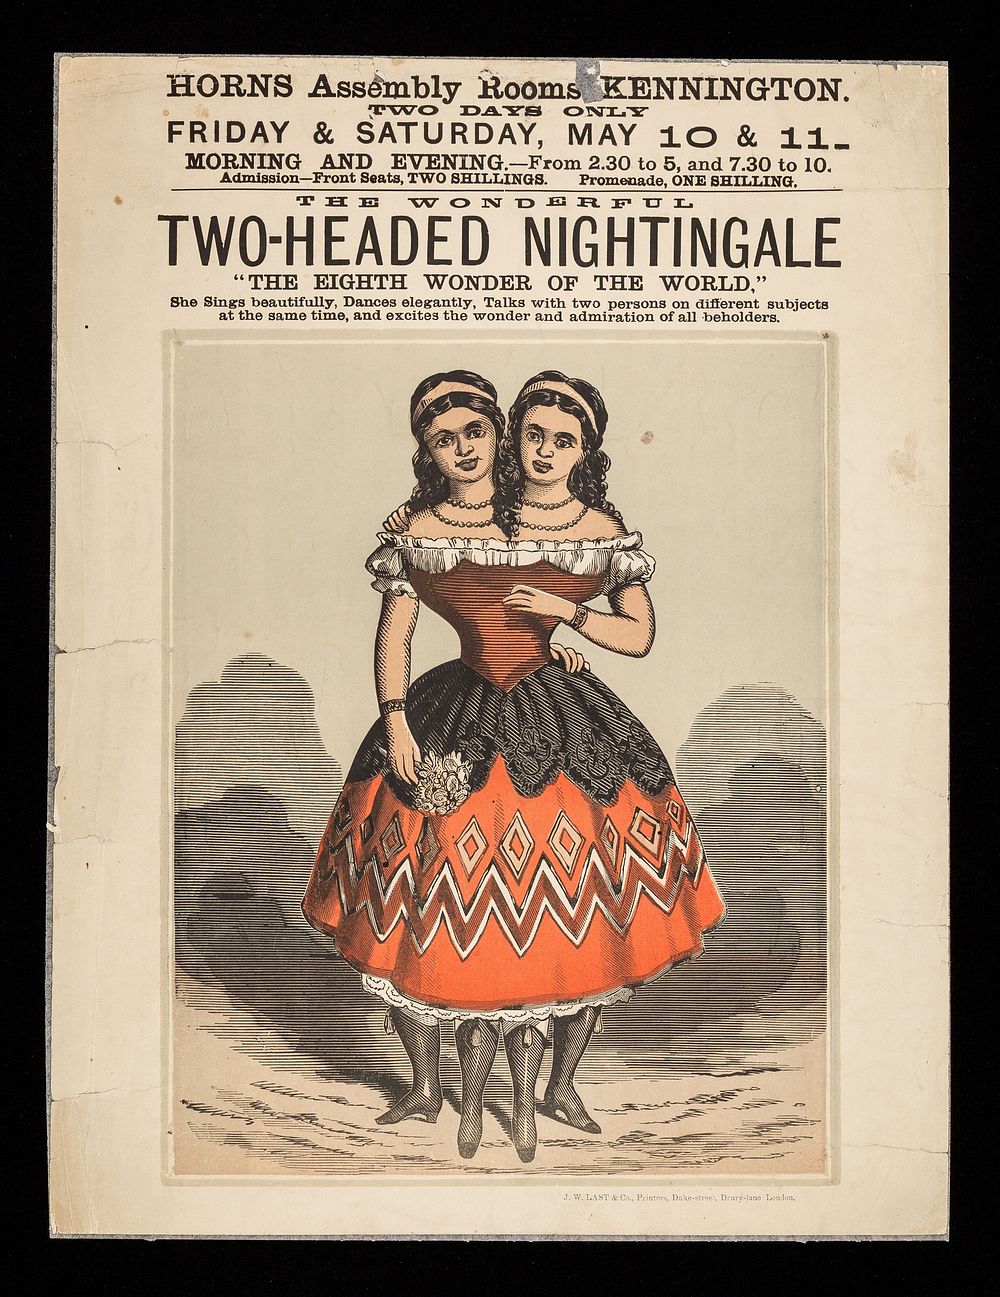 The wonderful two-headed nightingale : "the eighth wonder of the world" / Horns Assembly Rooms, Kennington.